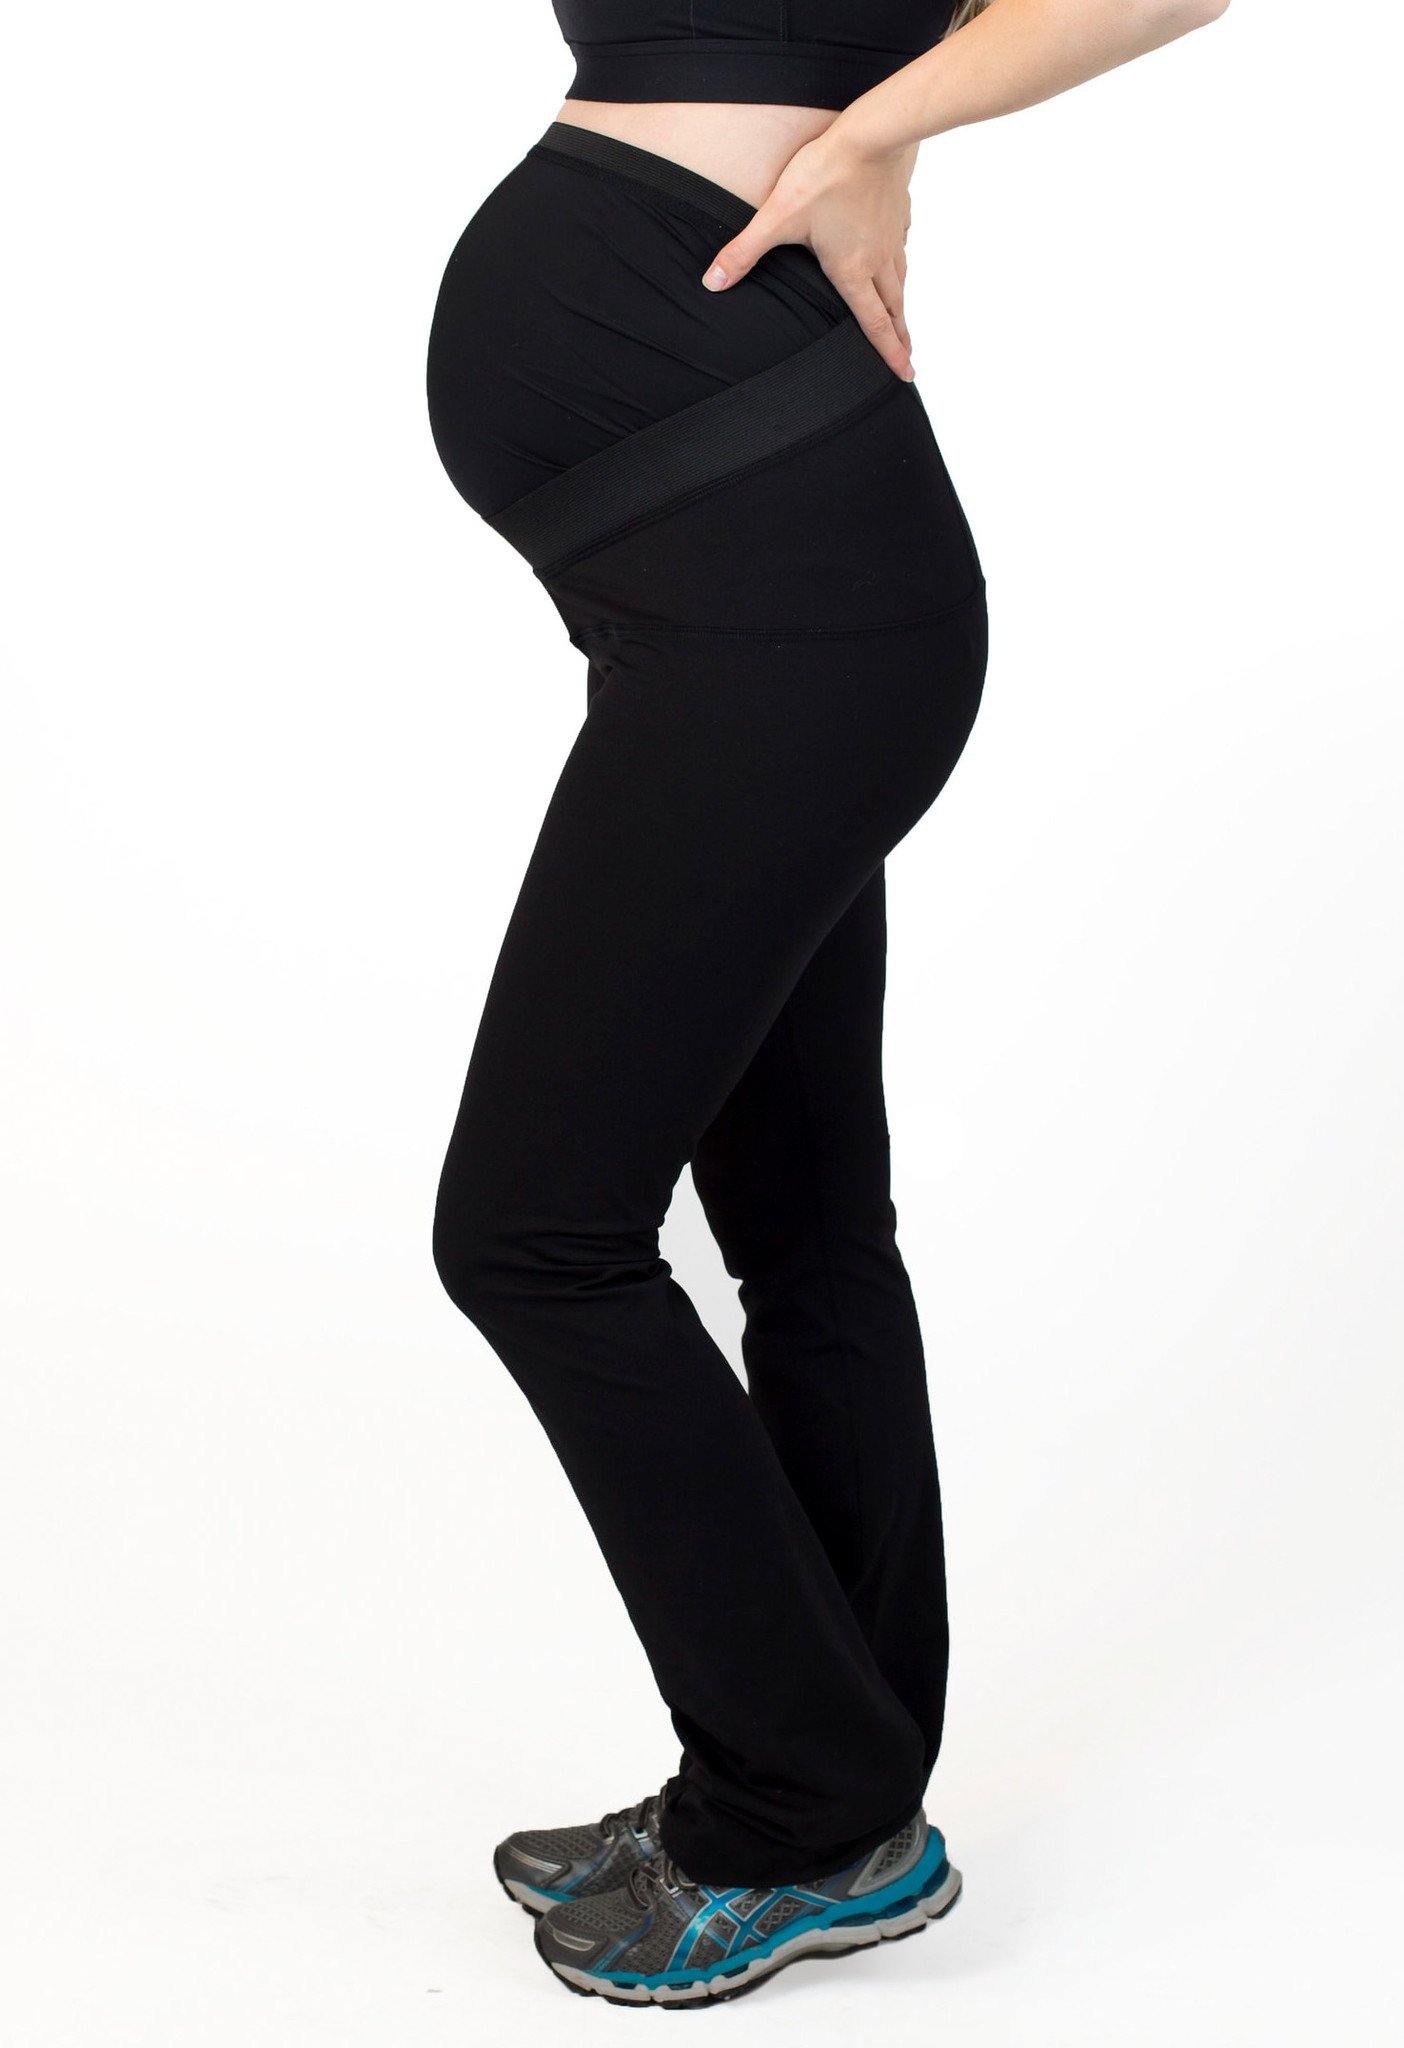 Maternity Yoga Pants Over The Belly Buttery Soft Workout Leggings